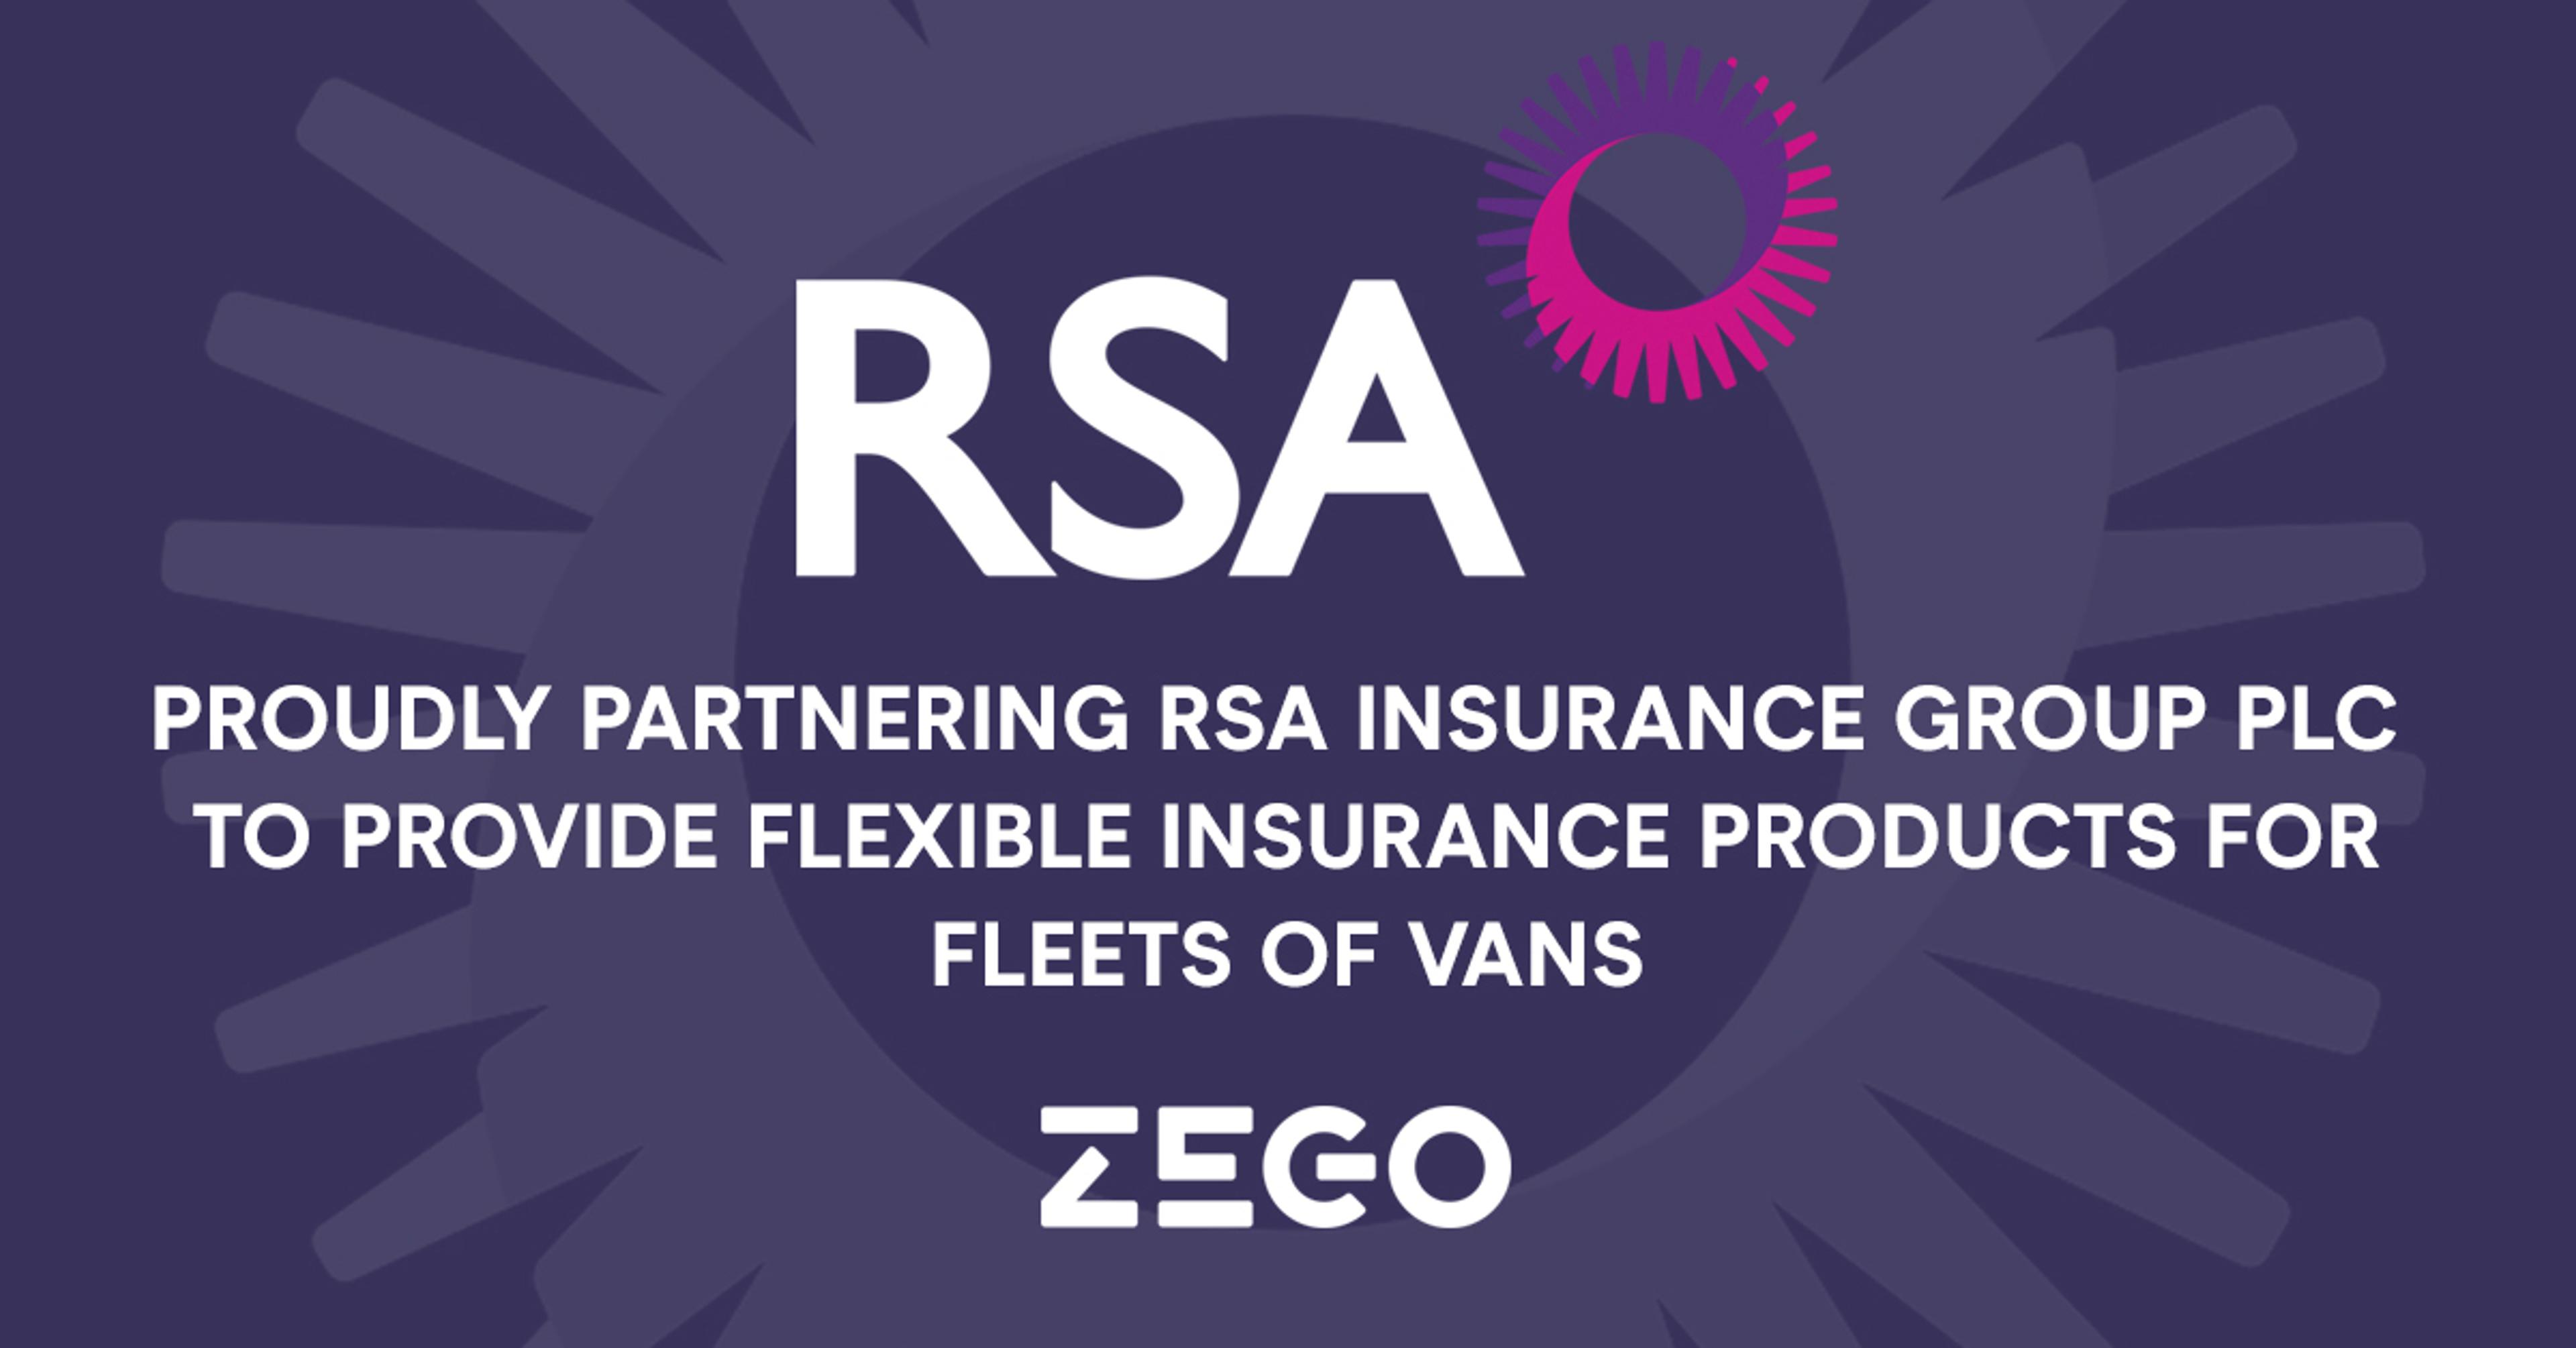 Zego partners with RSA to launch flexible insurance for fleets of vans